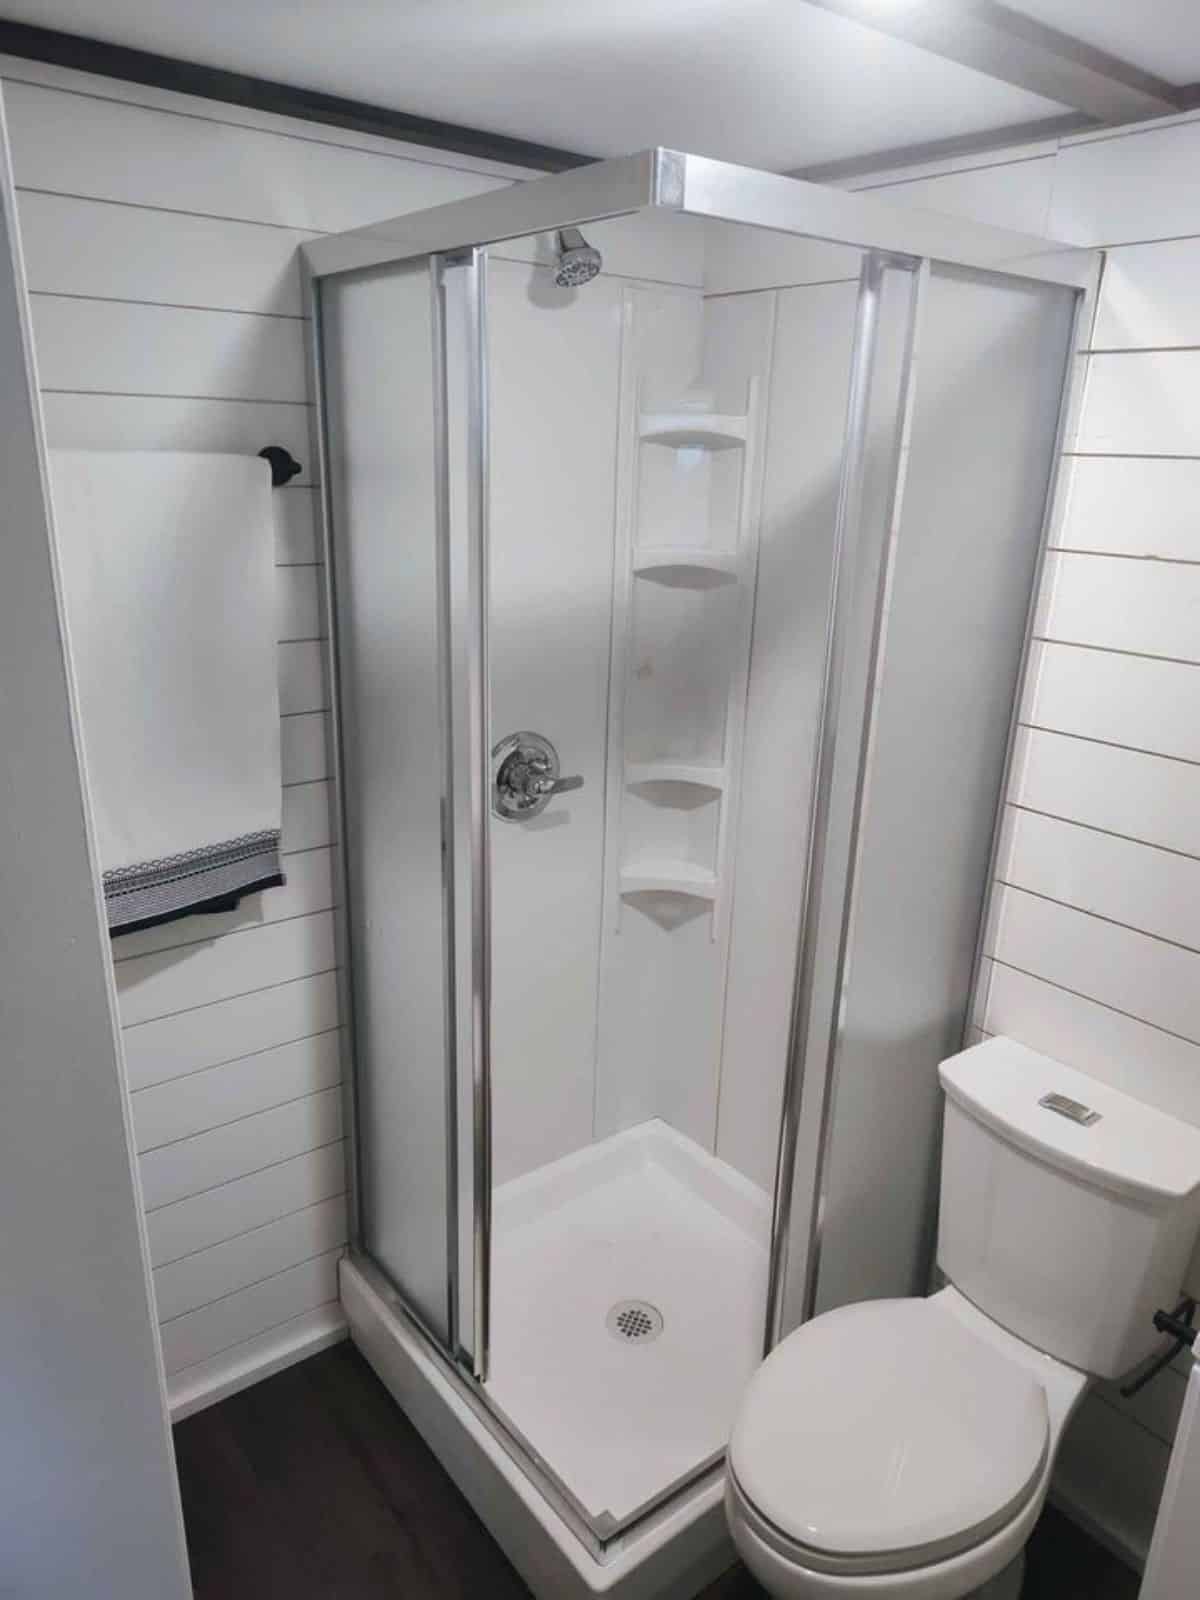 Separate shower area with glass door in bathroom of 38’ Tiny House